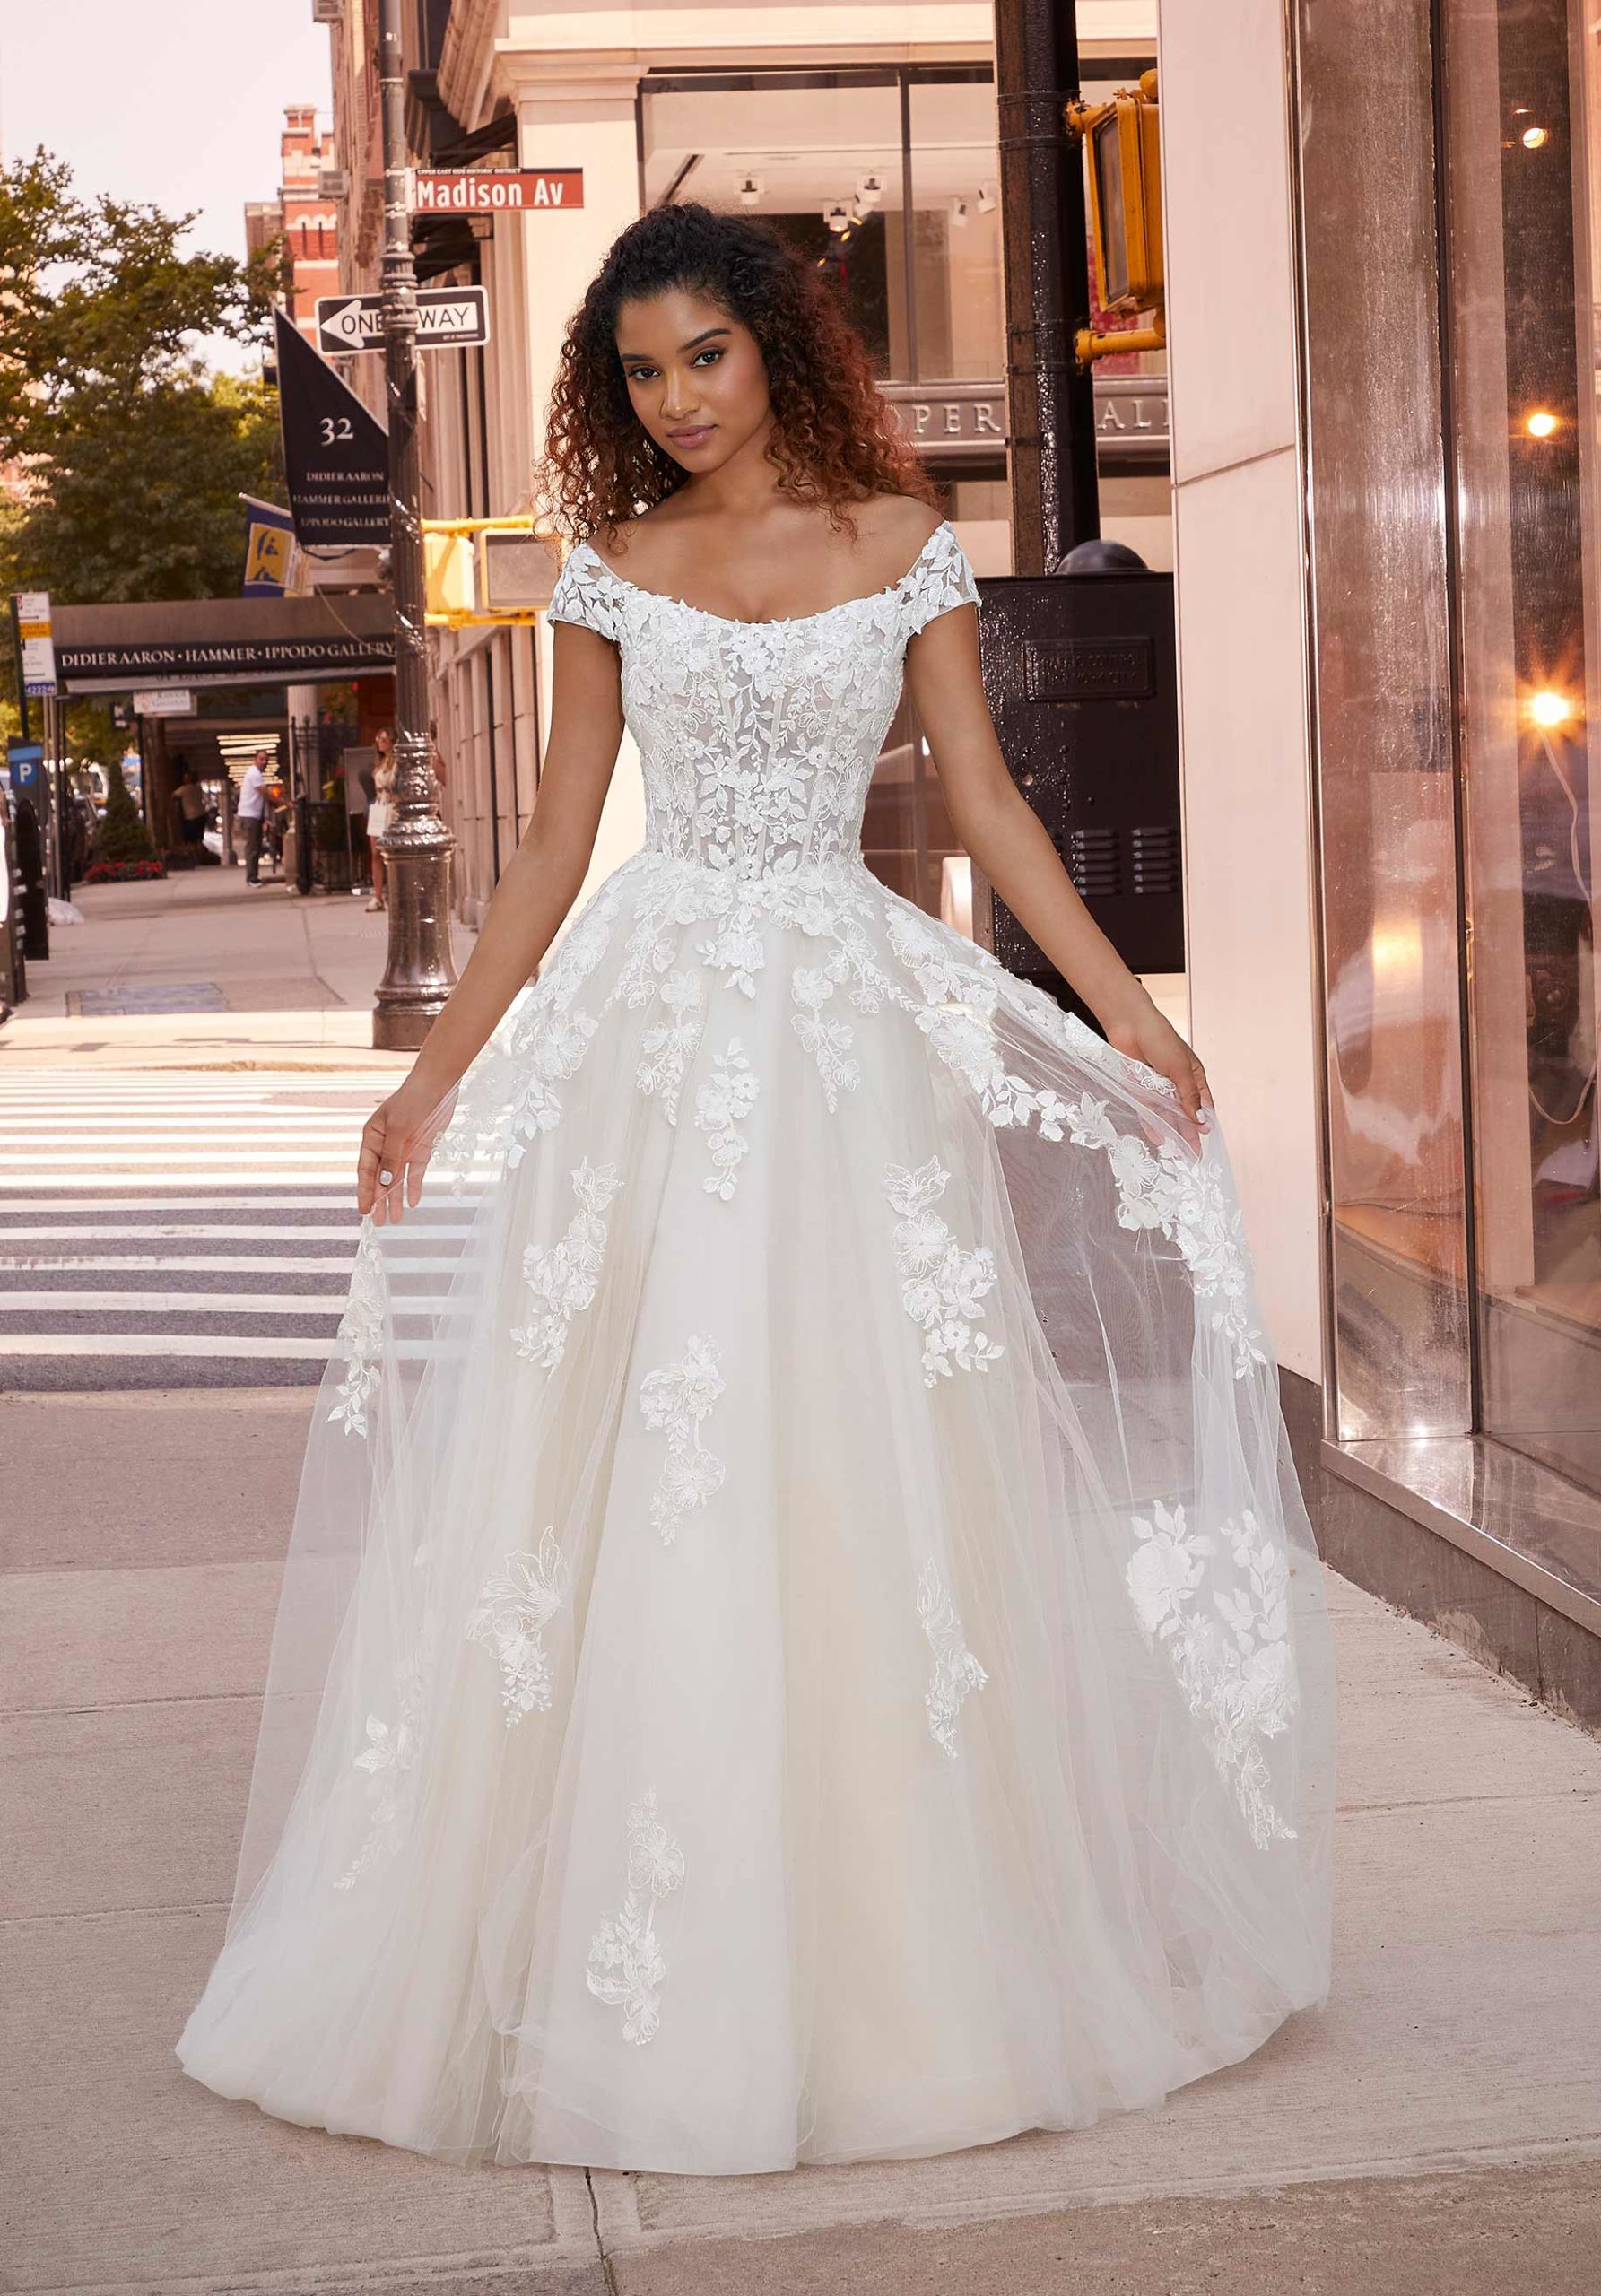 New The Other White Dress by Morilee Wedding Dresses